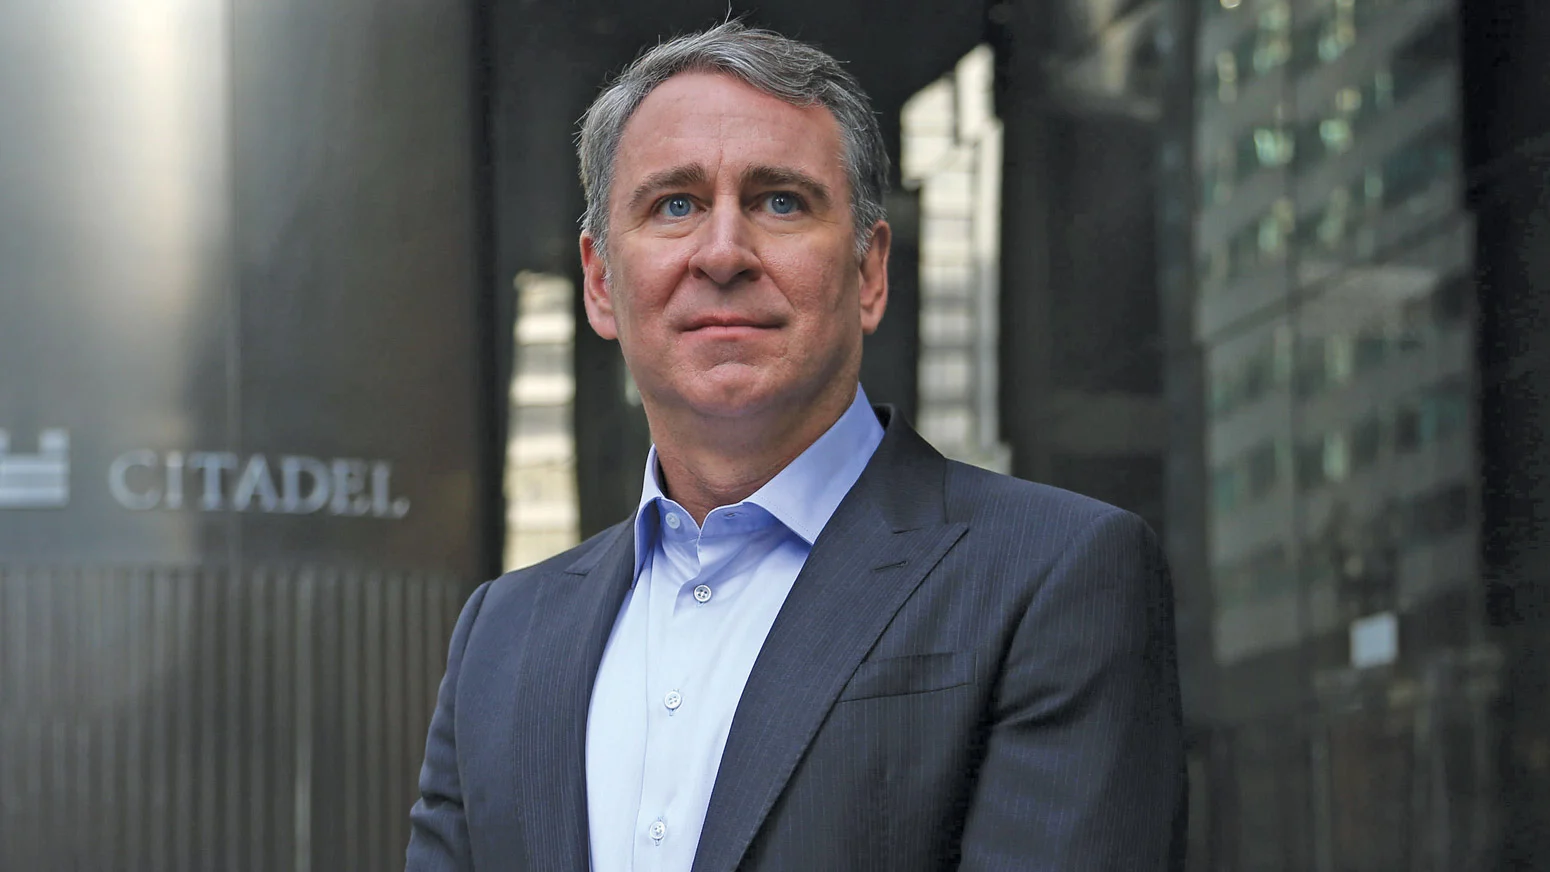 What Ken Griffin thinks about venture capital